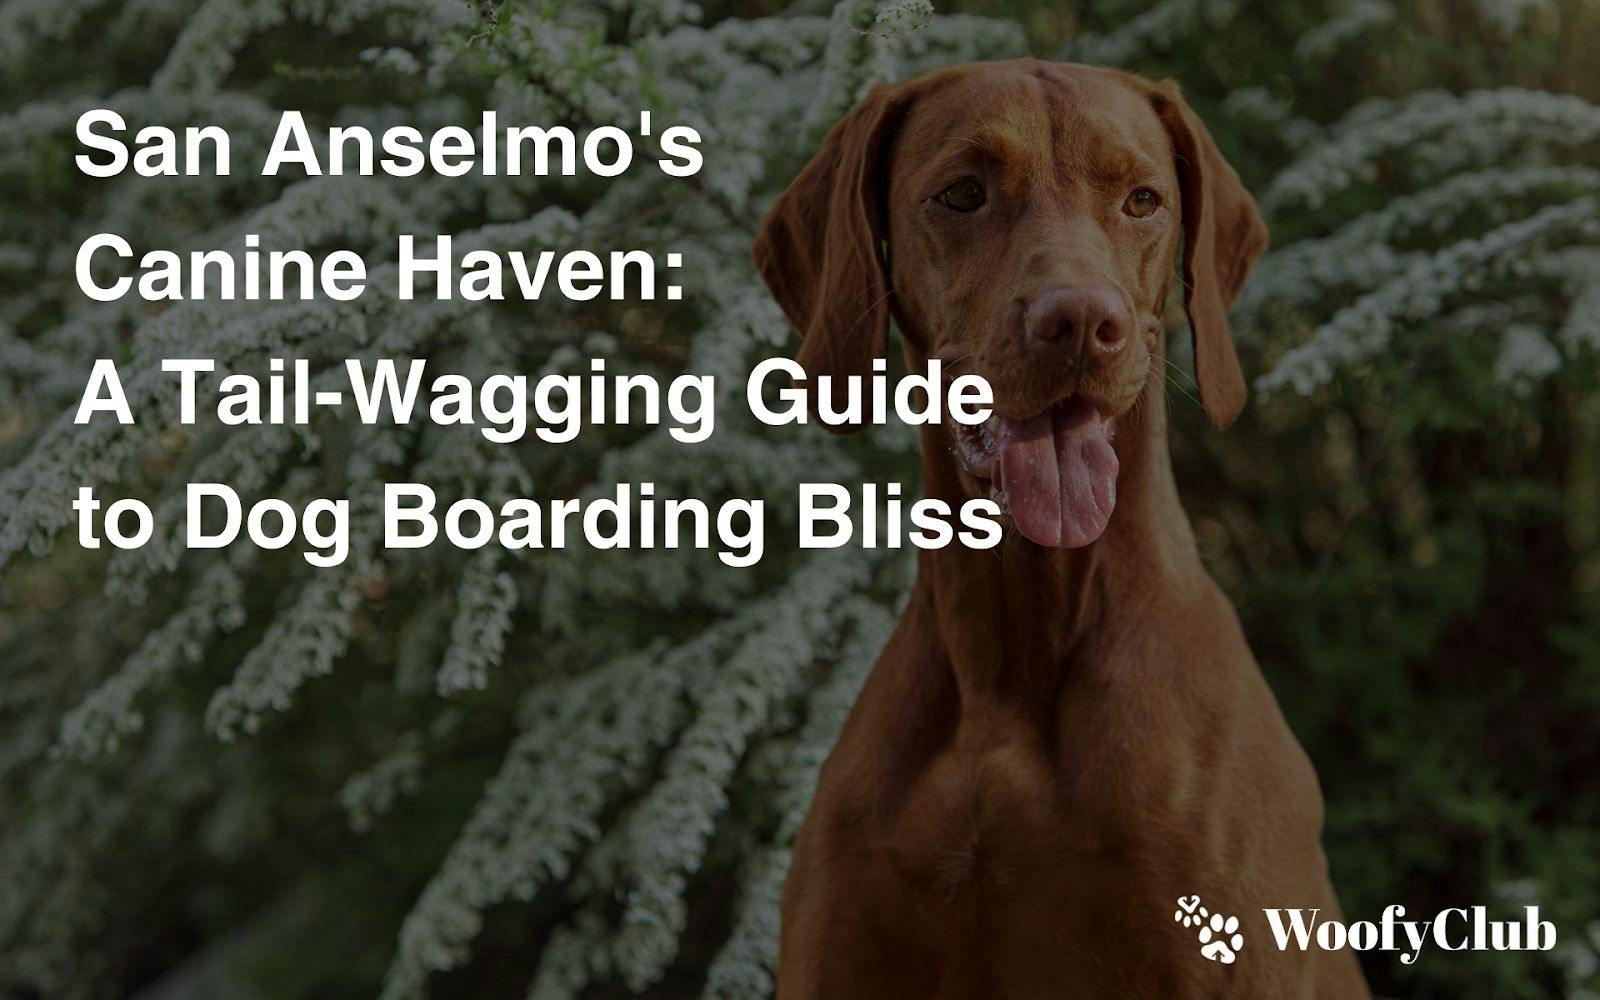 San Anselmo's Canine Haven: A Tail-Wagging Guide To Dog Boarding Bliss